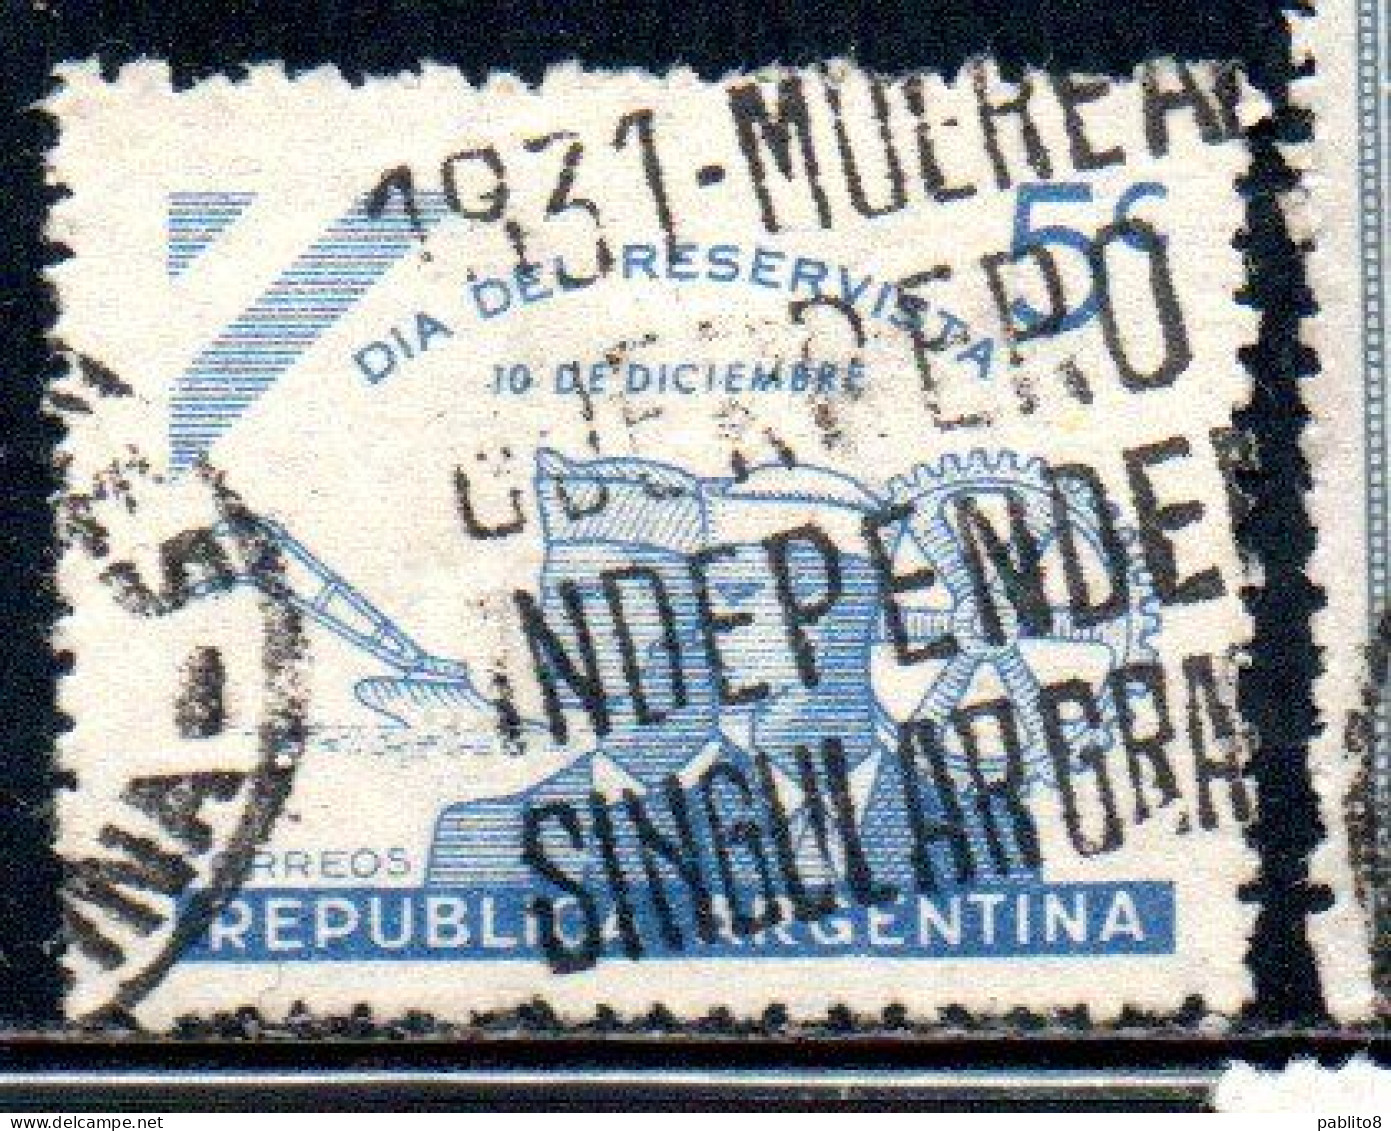 ARGENTINA 1944 DAY OF RESERVISTS 5c USED USADO OBLITERE' - Used Stamps